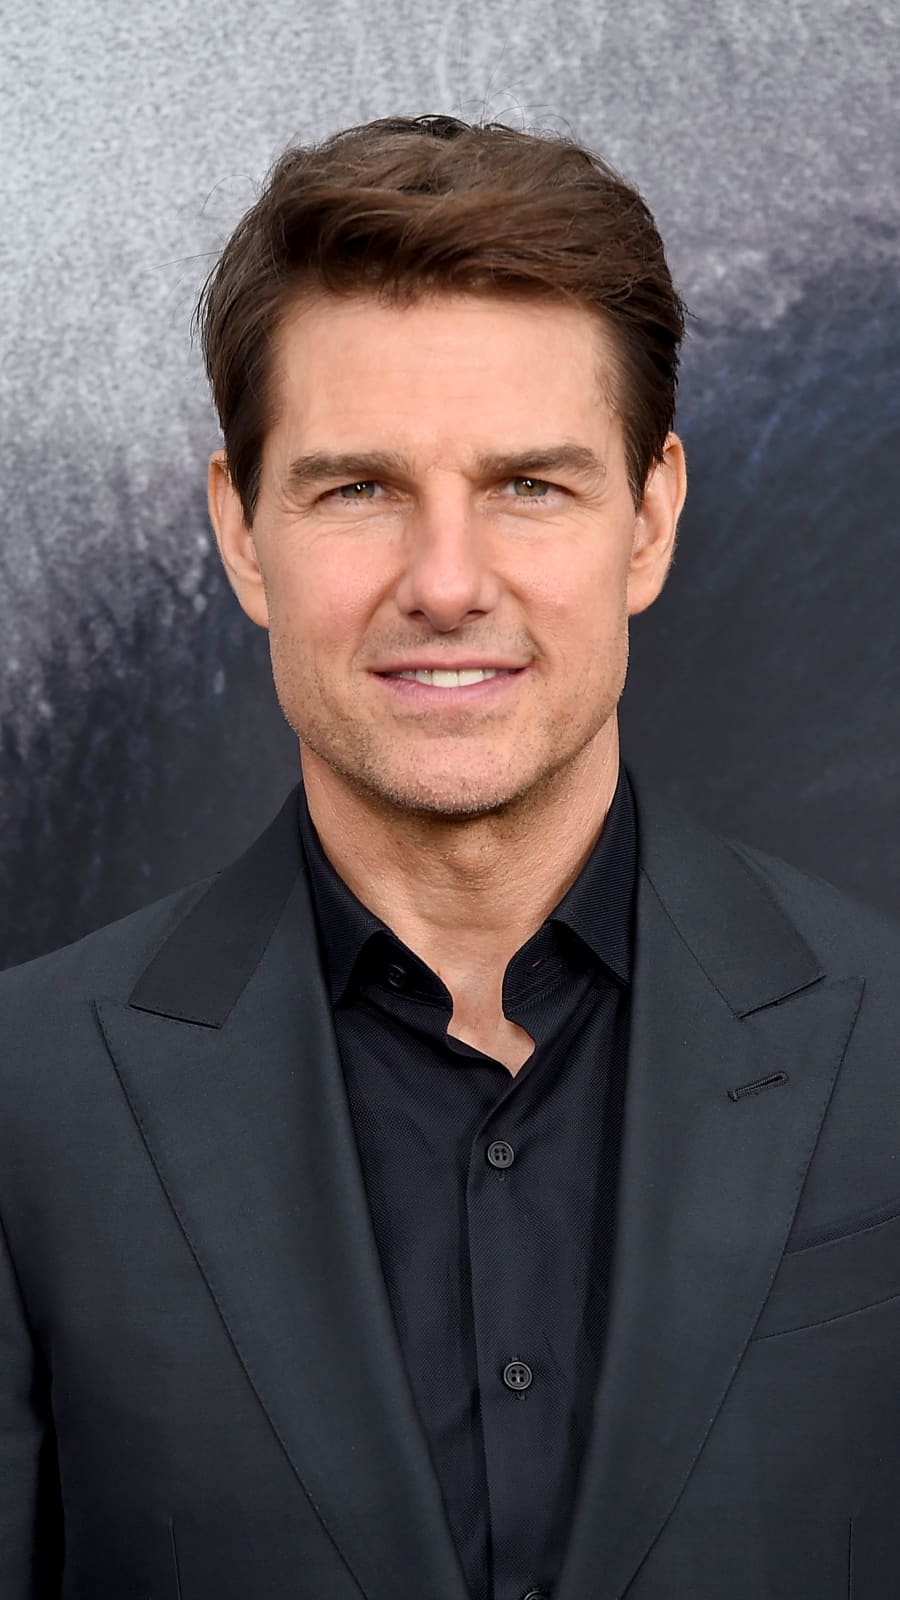 Through The Years With Tom Cruise